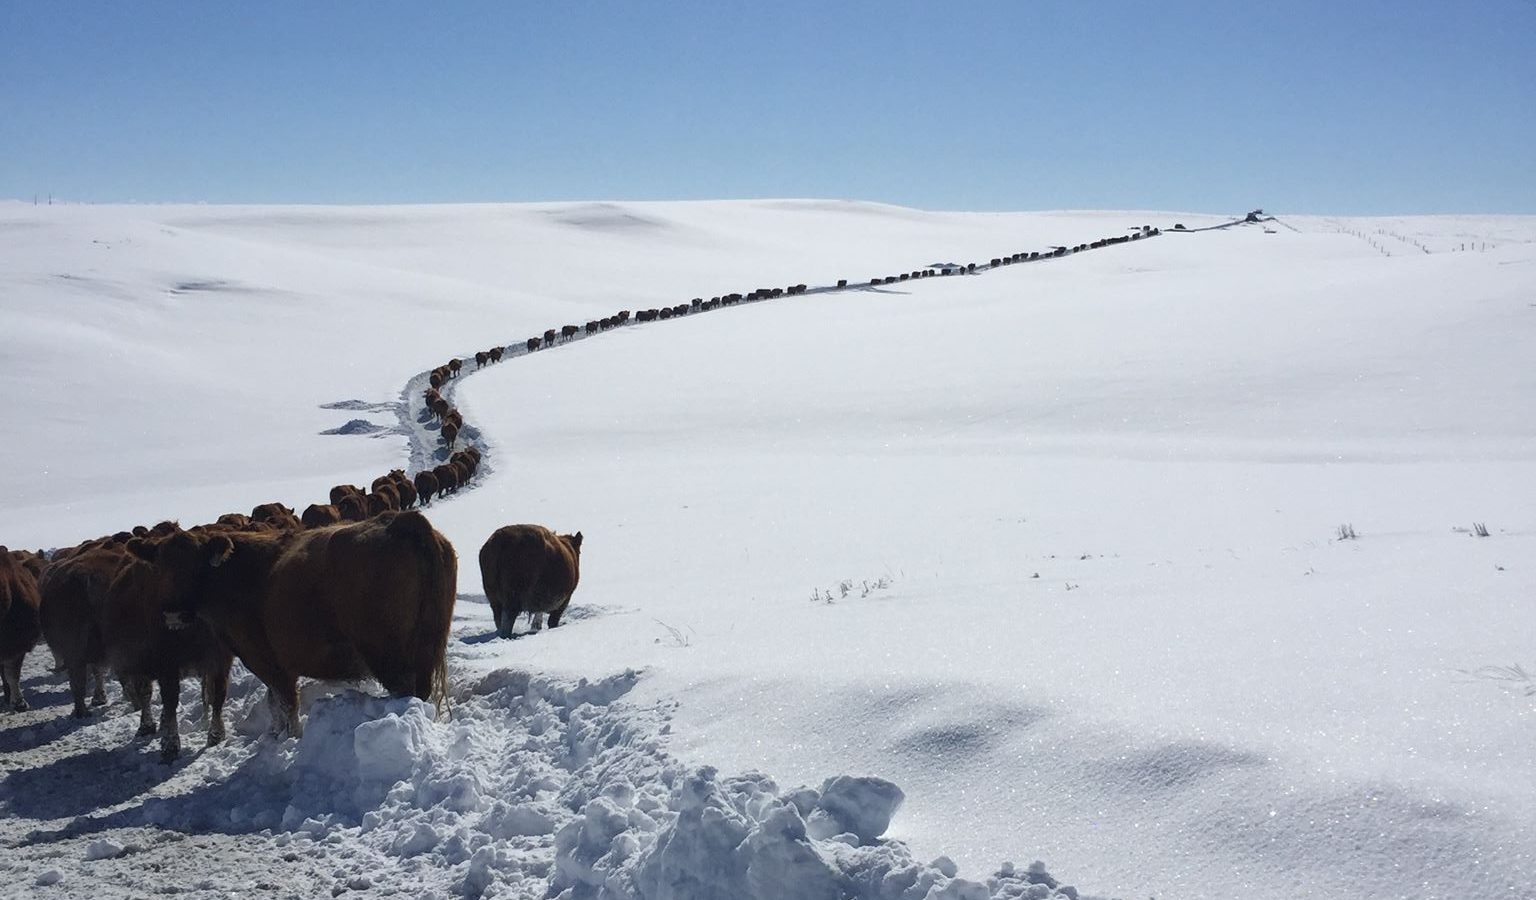 Red angus herd walking up snow trail